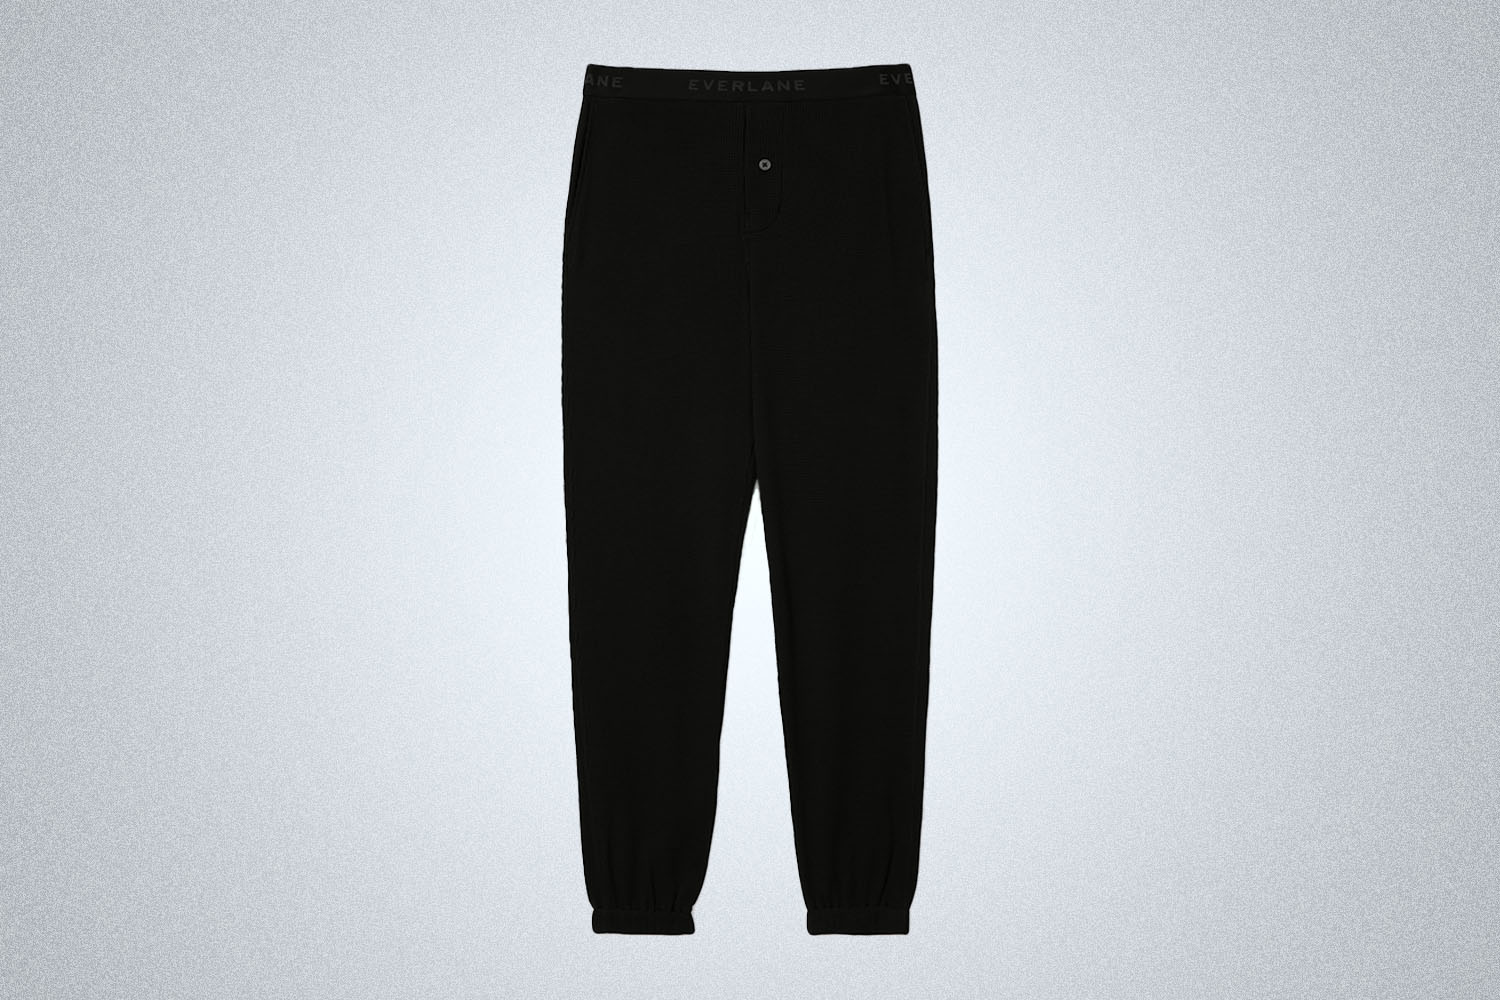 An Everlane Waffle Pants on a grey background